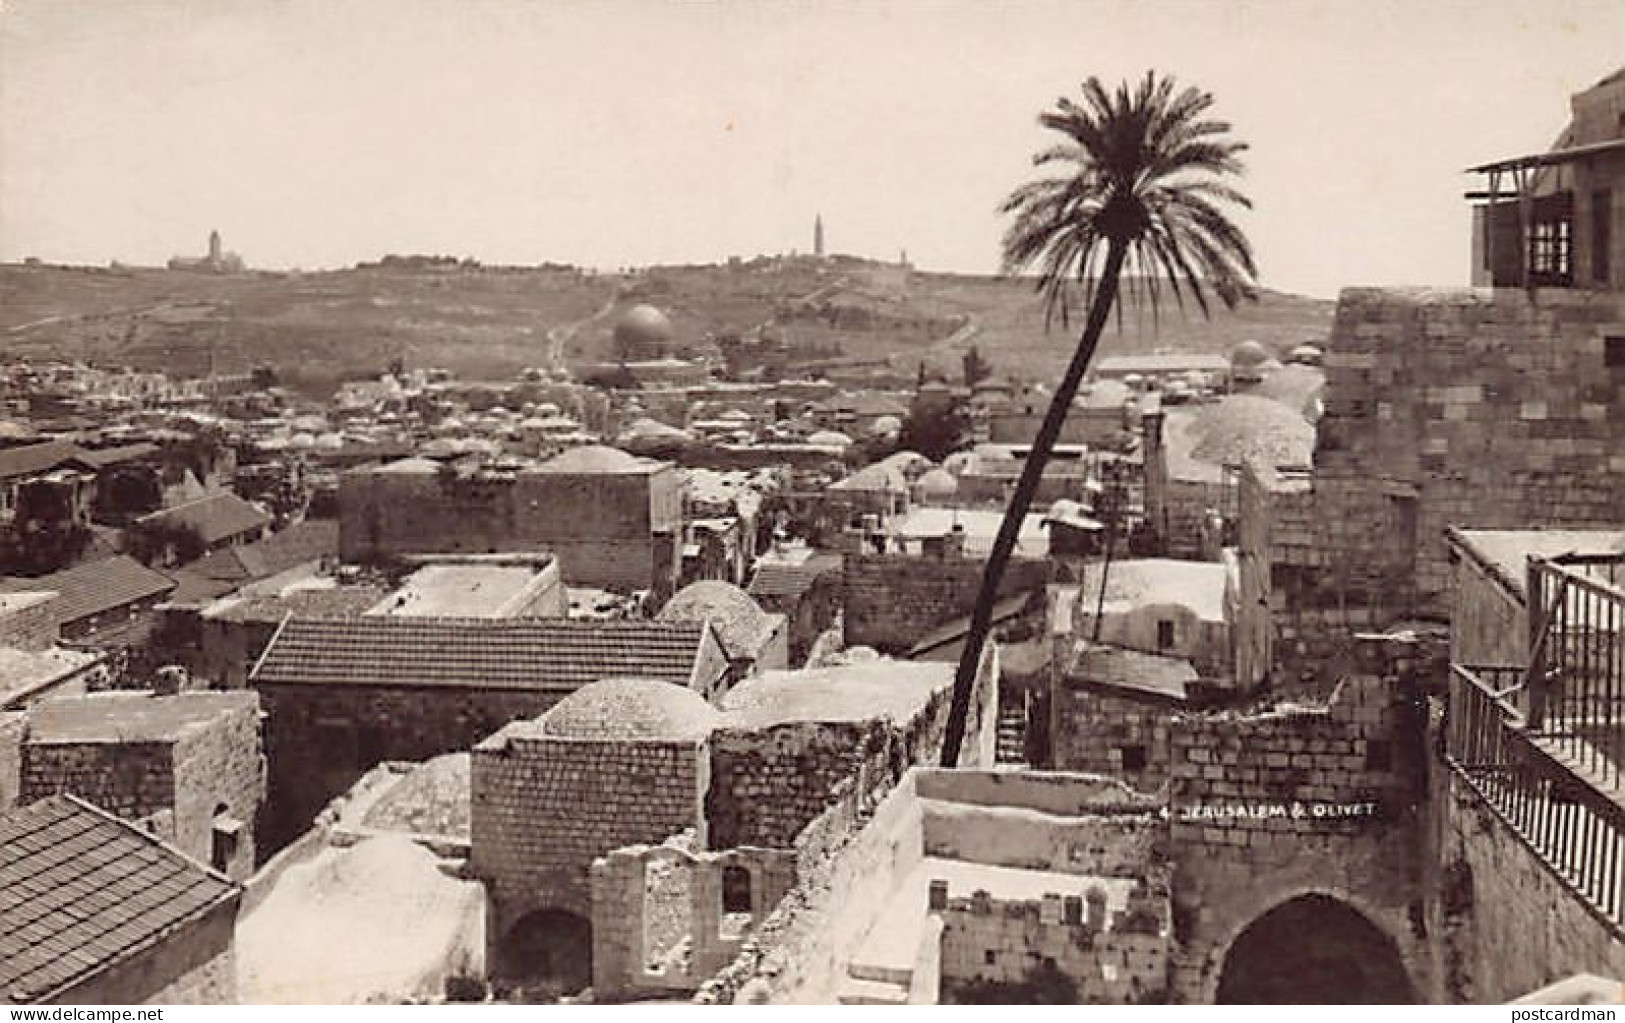 Israel - JERUSALEM - Bird's Eye View - REAL PHOTO - Publ. American Colony Photo Cards 4 - Israel